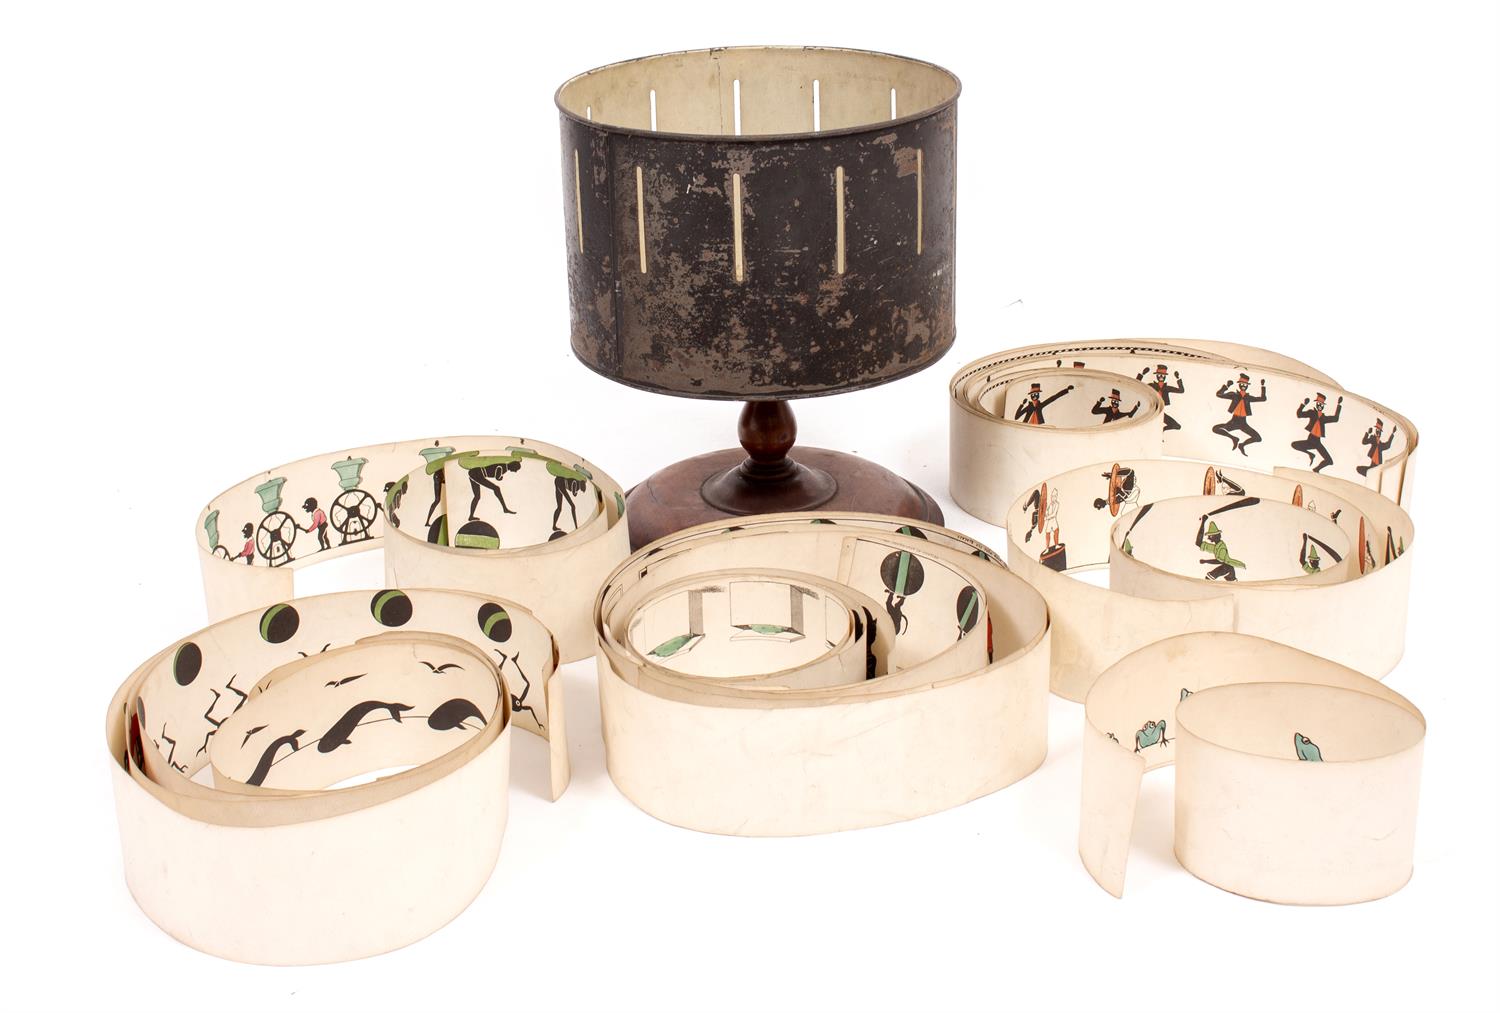 67 - A 19TH CENTURY 'WHEEL OF LIFE' ZOETROPE